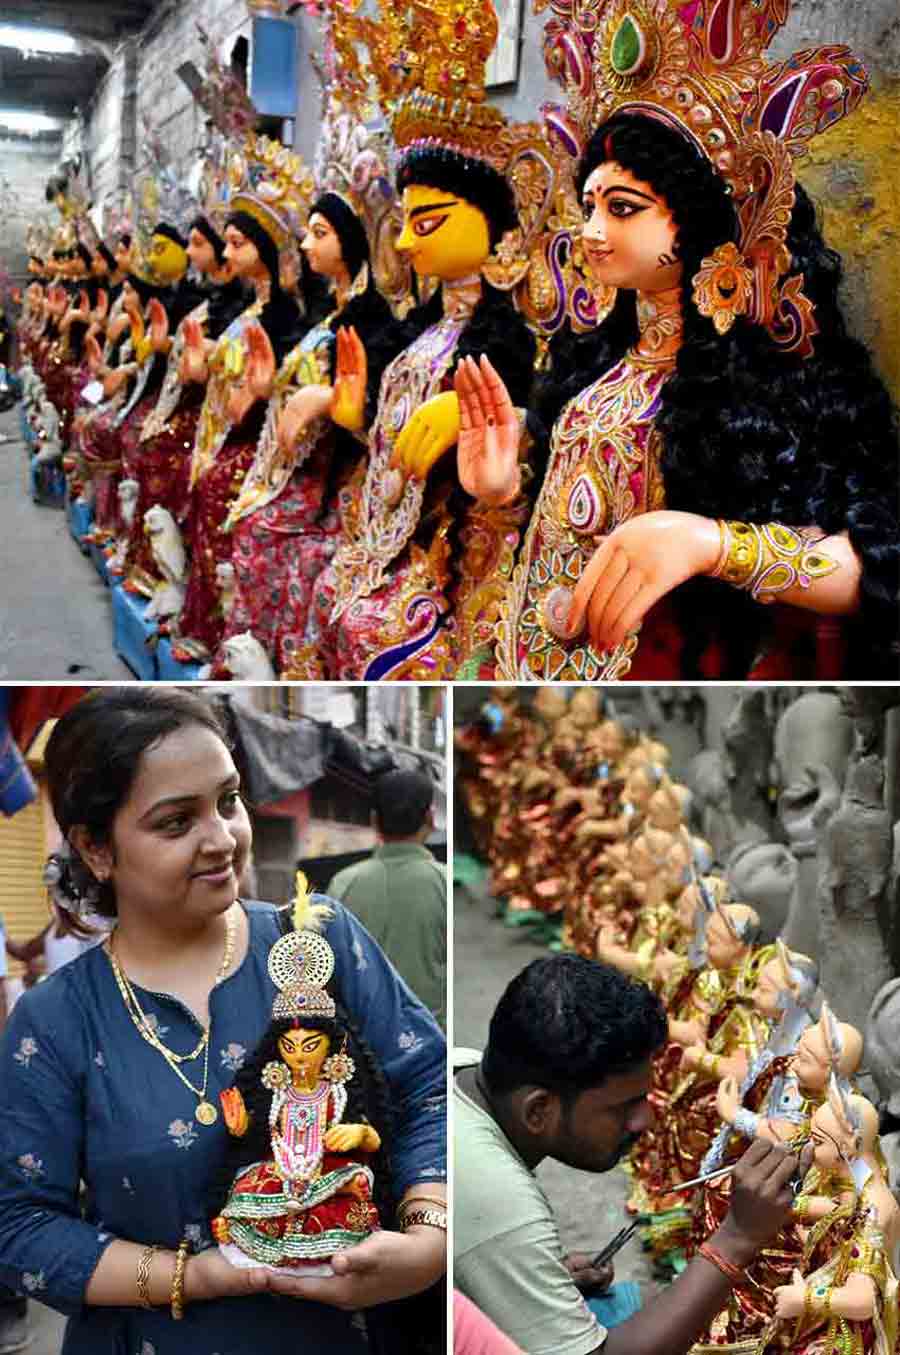 Two days ahead of Lakshmi Puja, artists are working overtime to finish the idols to meet the deadline. Kojagari Lakshmi Puja 2023 will take place on October 28, 2023 between 10:55 pm and 11:46 pm. Purnima tithi will last 50 minutes, beginning at 4.17 am on October 28 and end at 1.53 am on October 29, 2023 